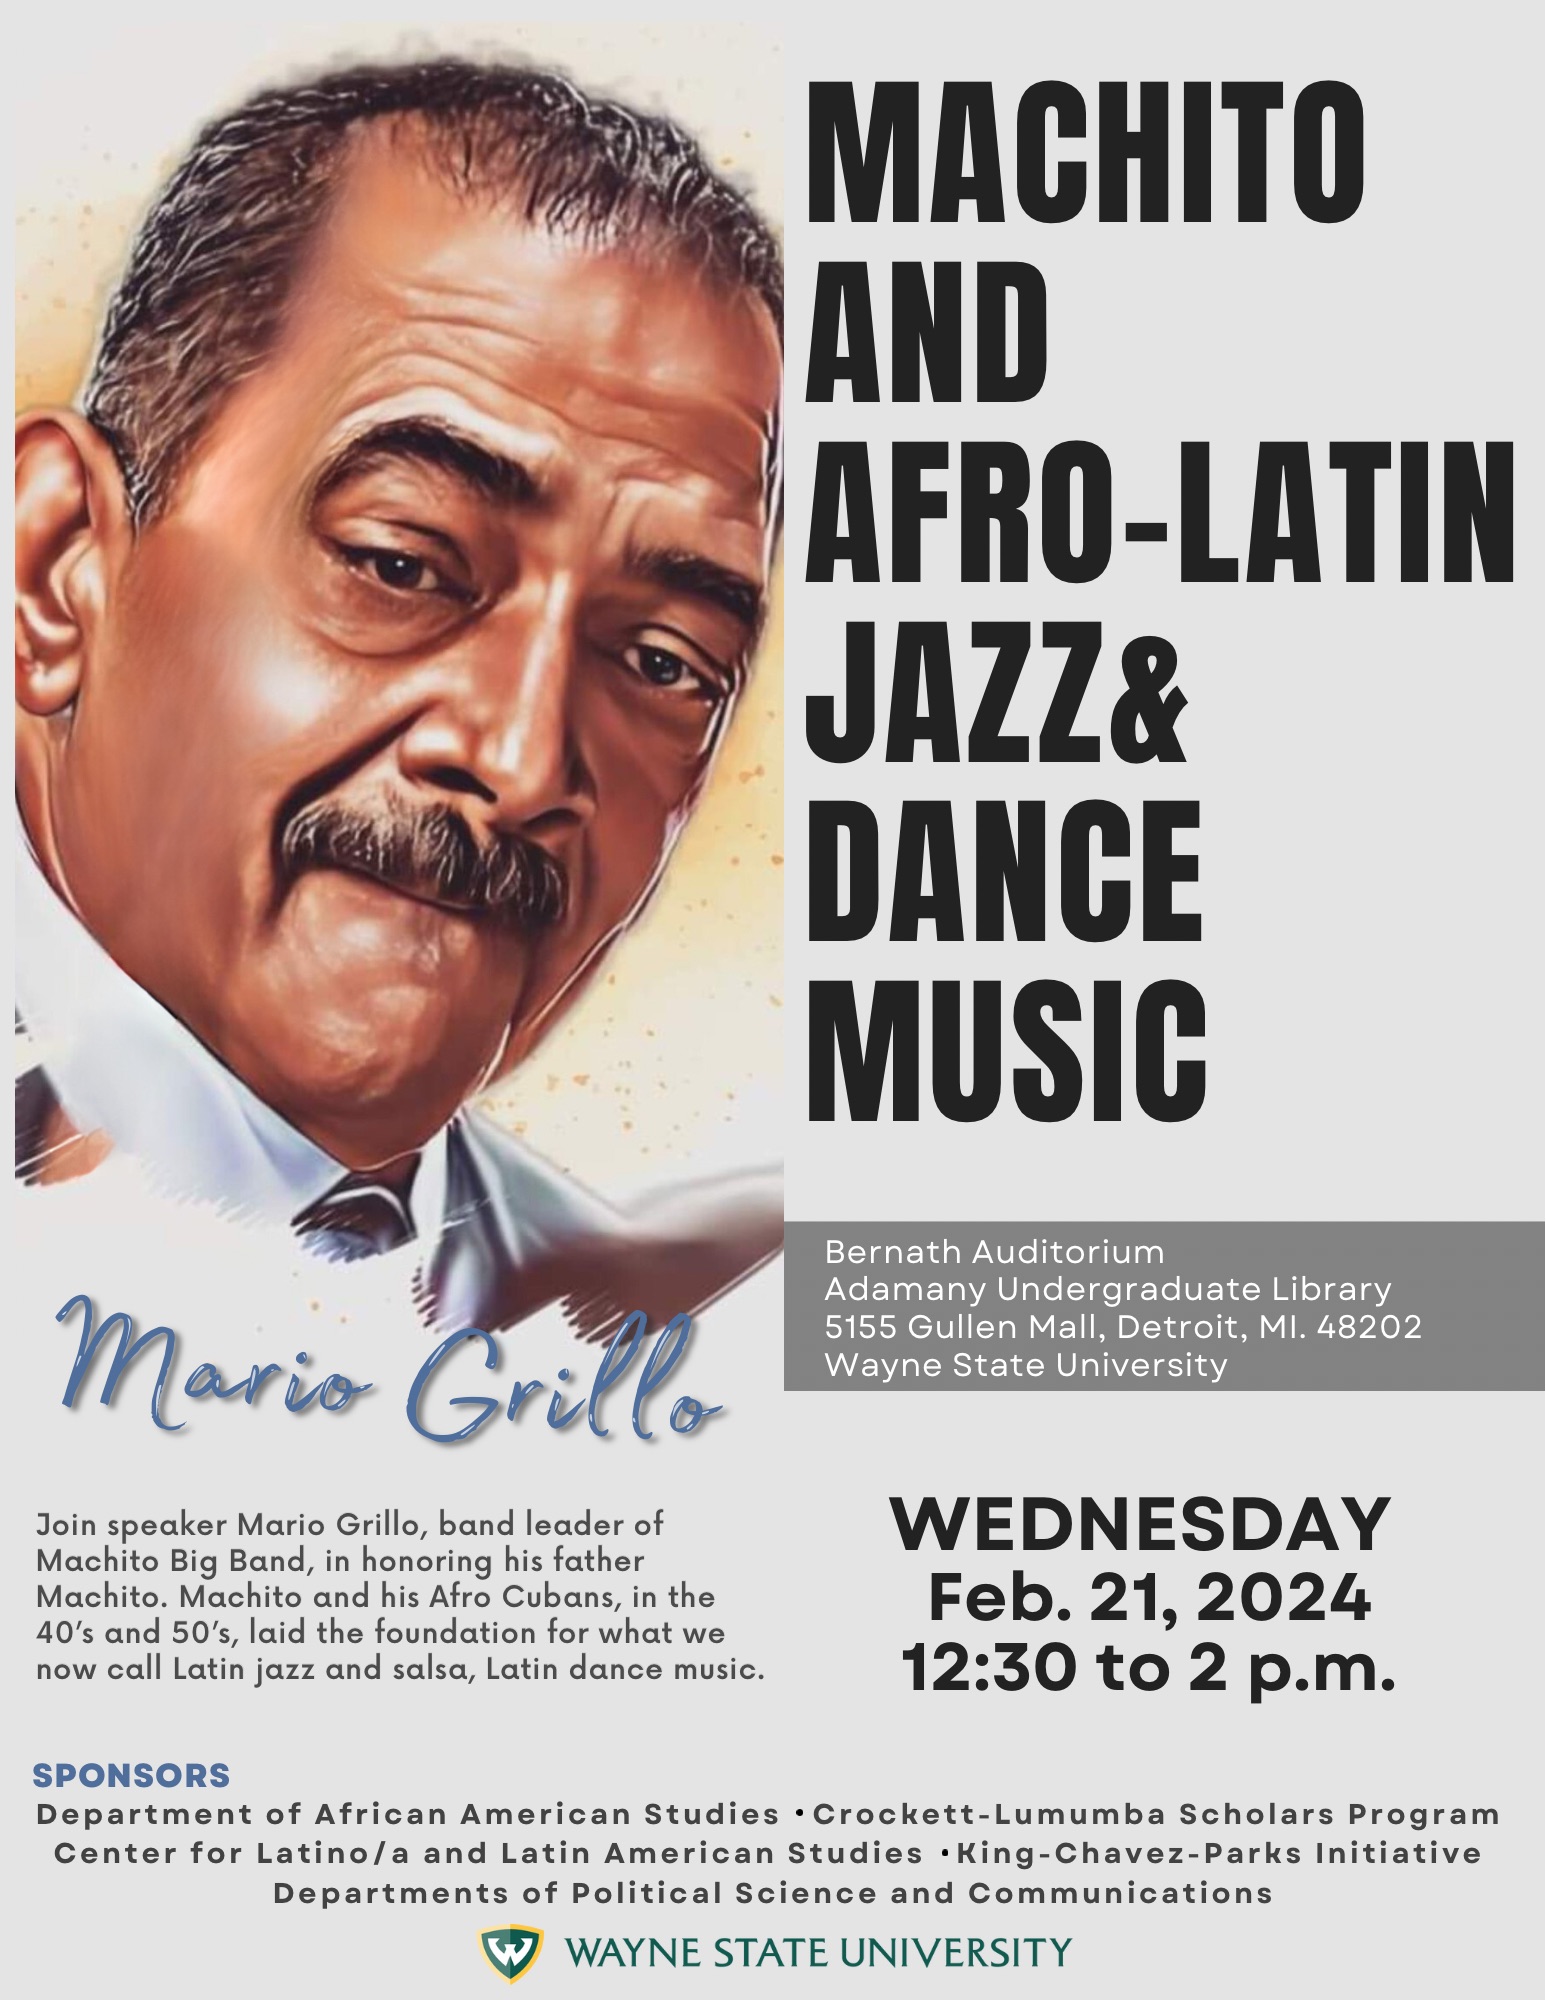 Mario Grillo on the Machito influence, Afro-Latin jazz, and dance music